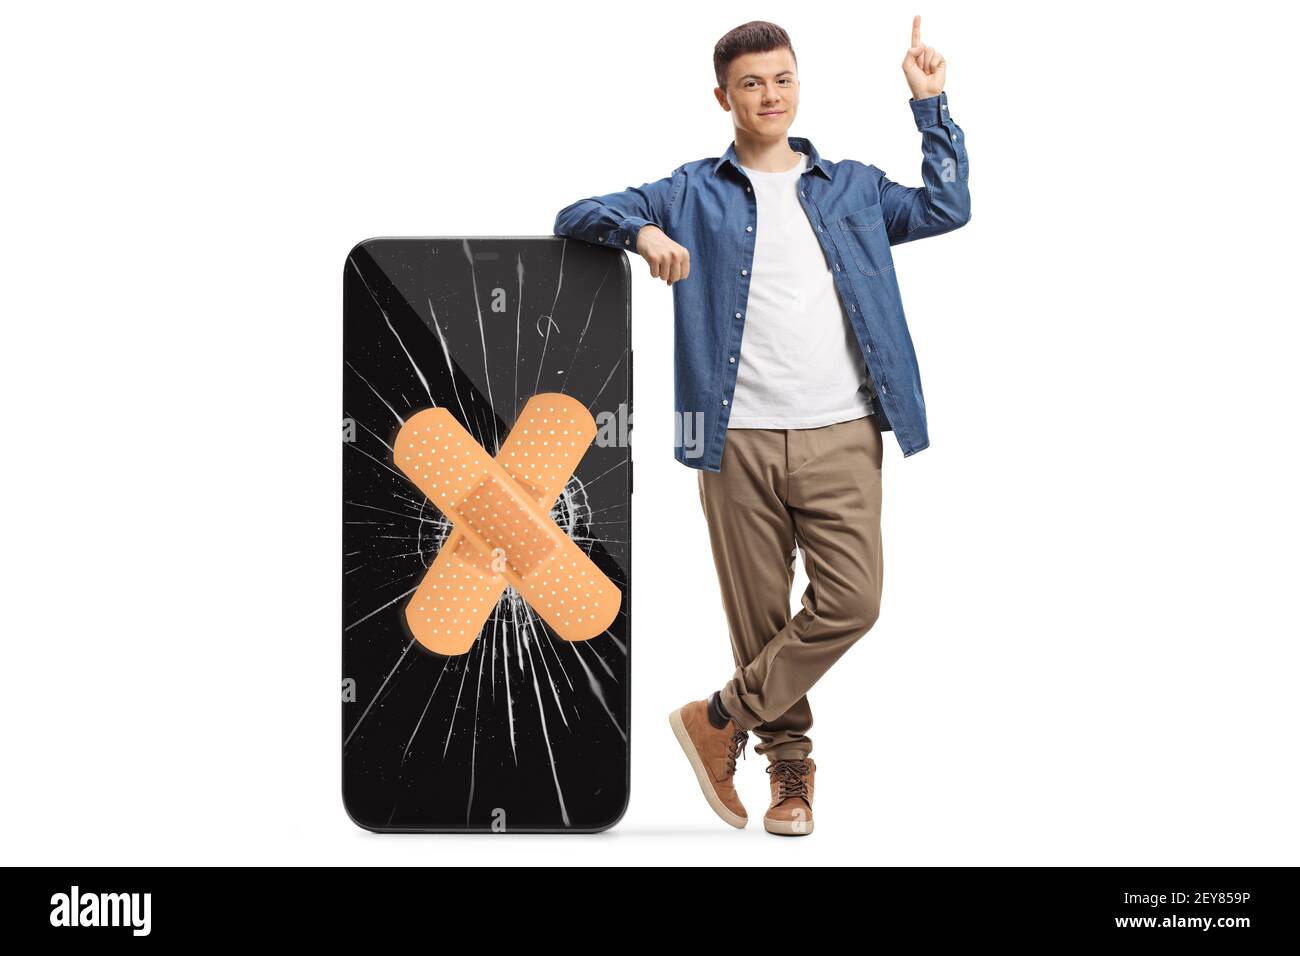 Full length portrait of a guy leaning on a big smartphone with cracked screen and bandage and pointing above isolated on white background Stock Photo